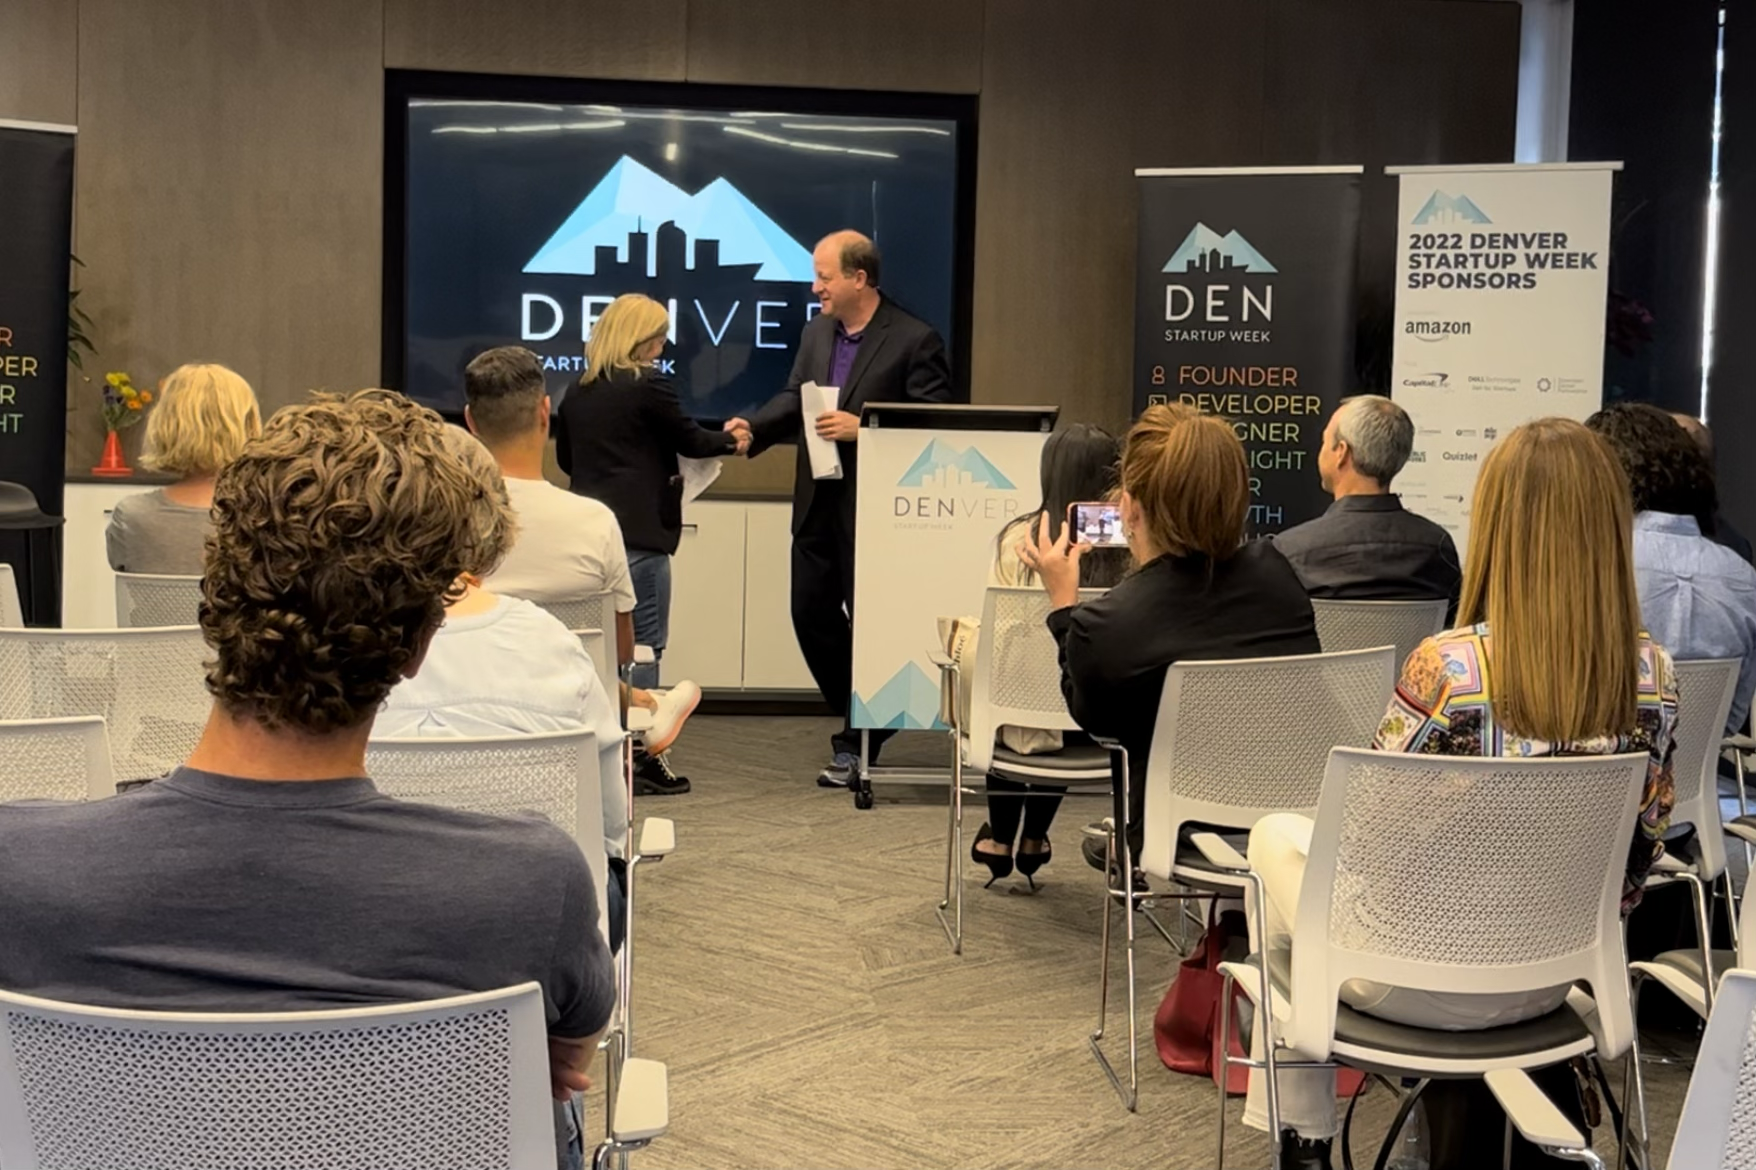 Governor Jared Polis with Denver Startup Week co-Founder Tammi Door just before he announced that Colorado would be the first State to accept cryptocurrency for tax payments on September 19, 2022.